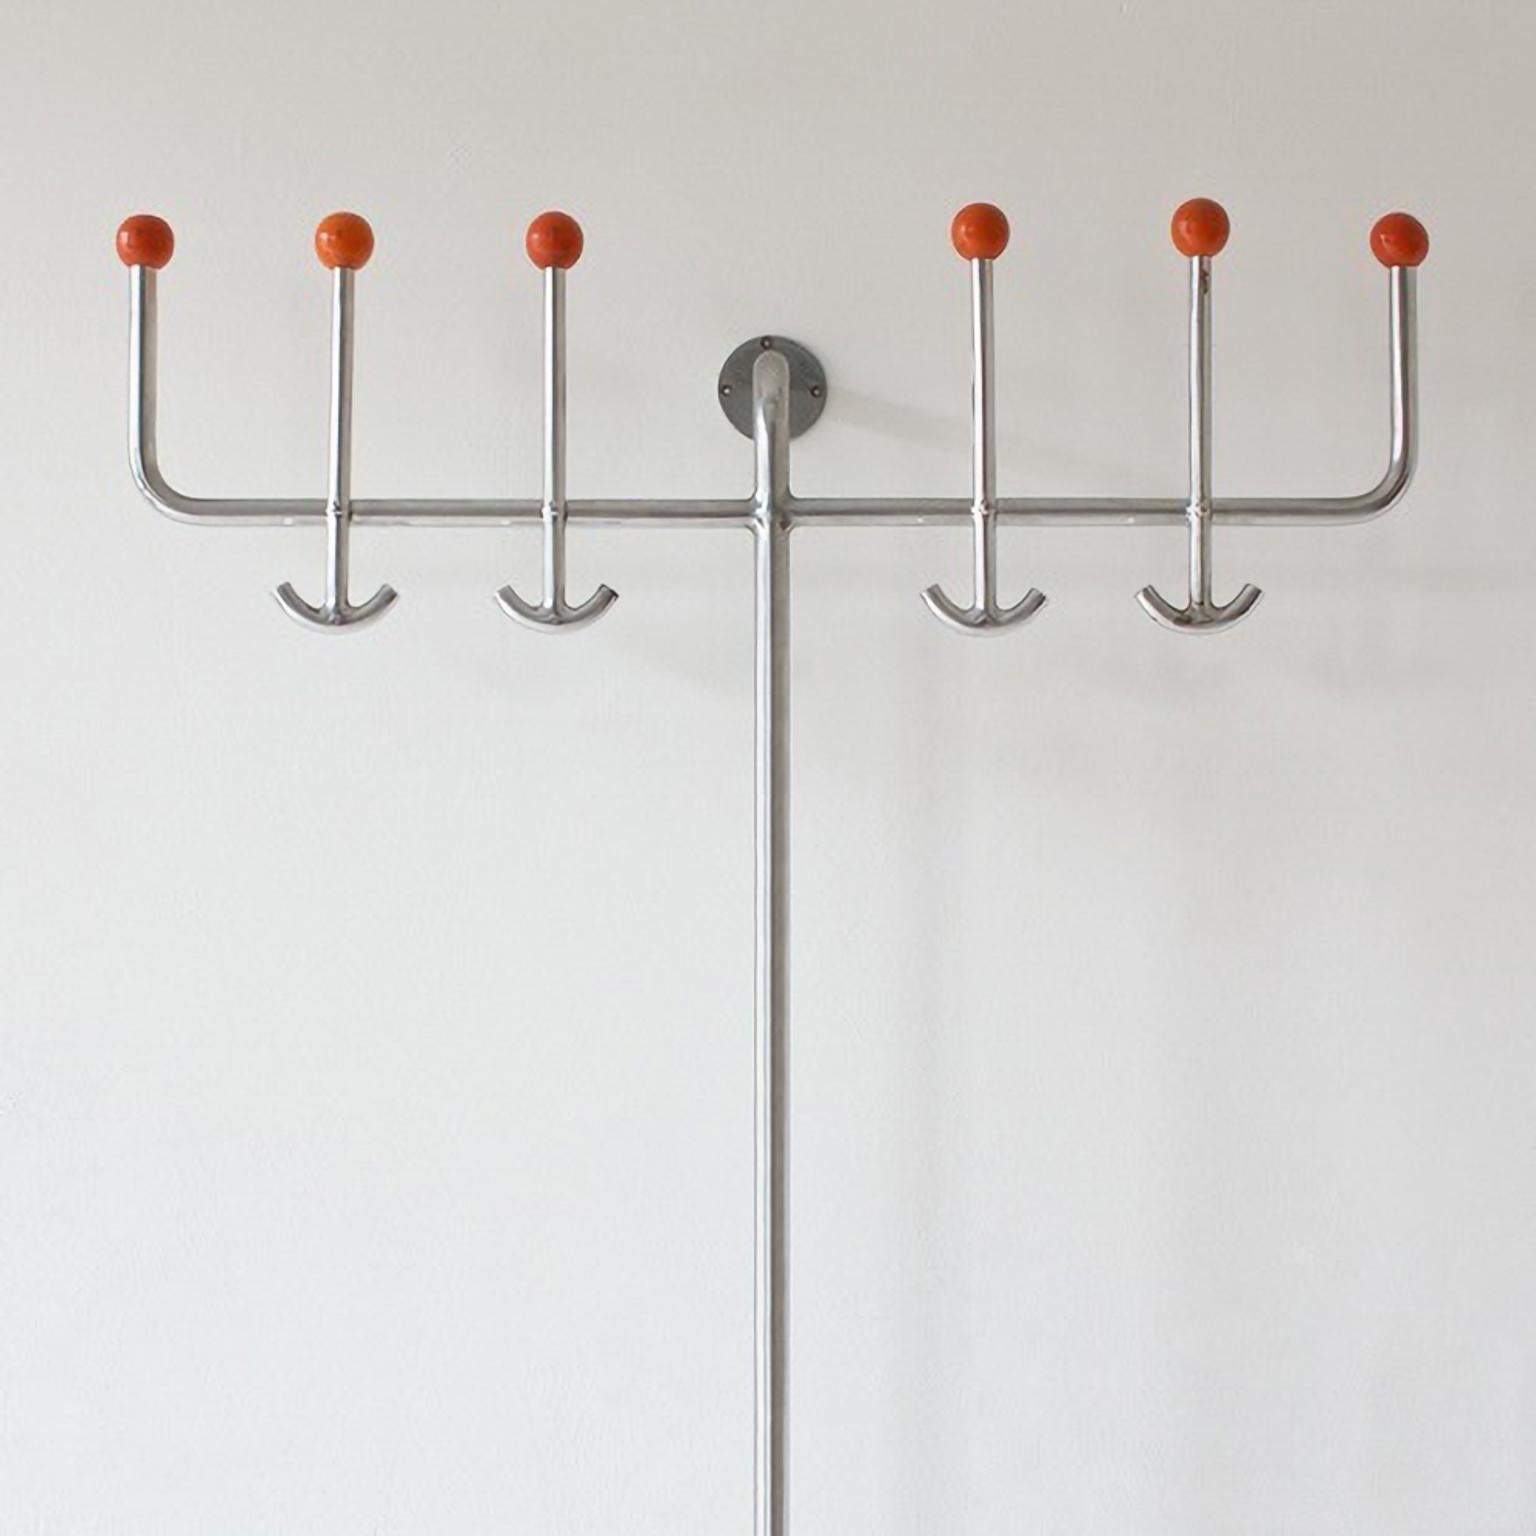 Modernist coat, hat and umbrella wall rack manufactured by Hynek Gottwald, circa 1930.
Chrome plated tubular steel, painted wood and metal. Extraordinary sculptural character and presence in the space.